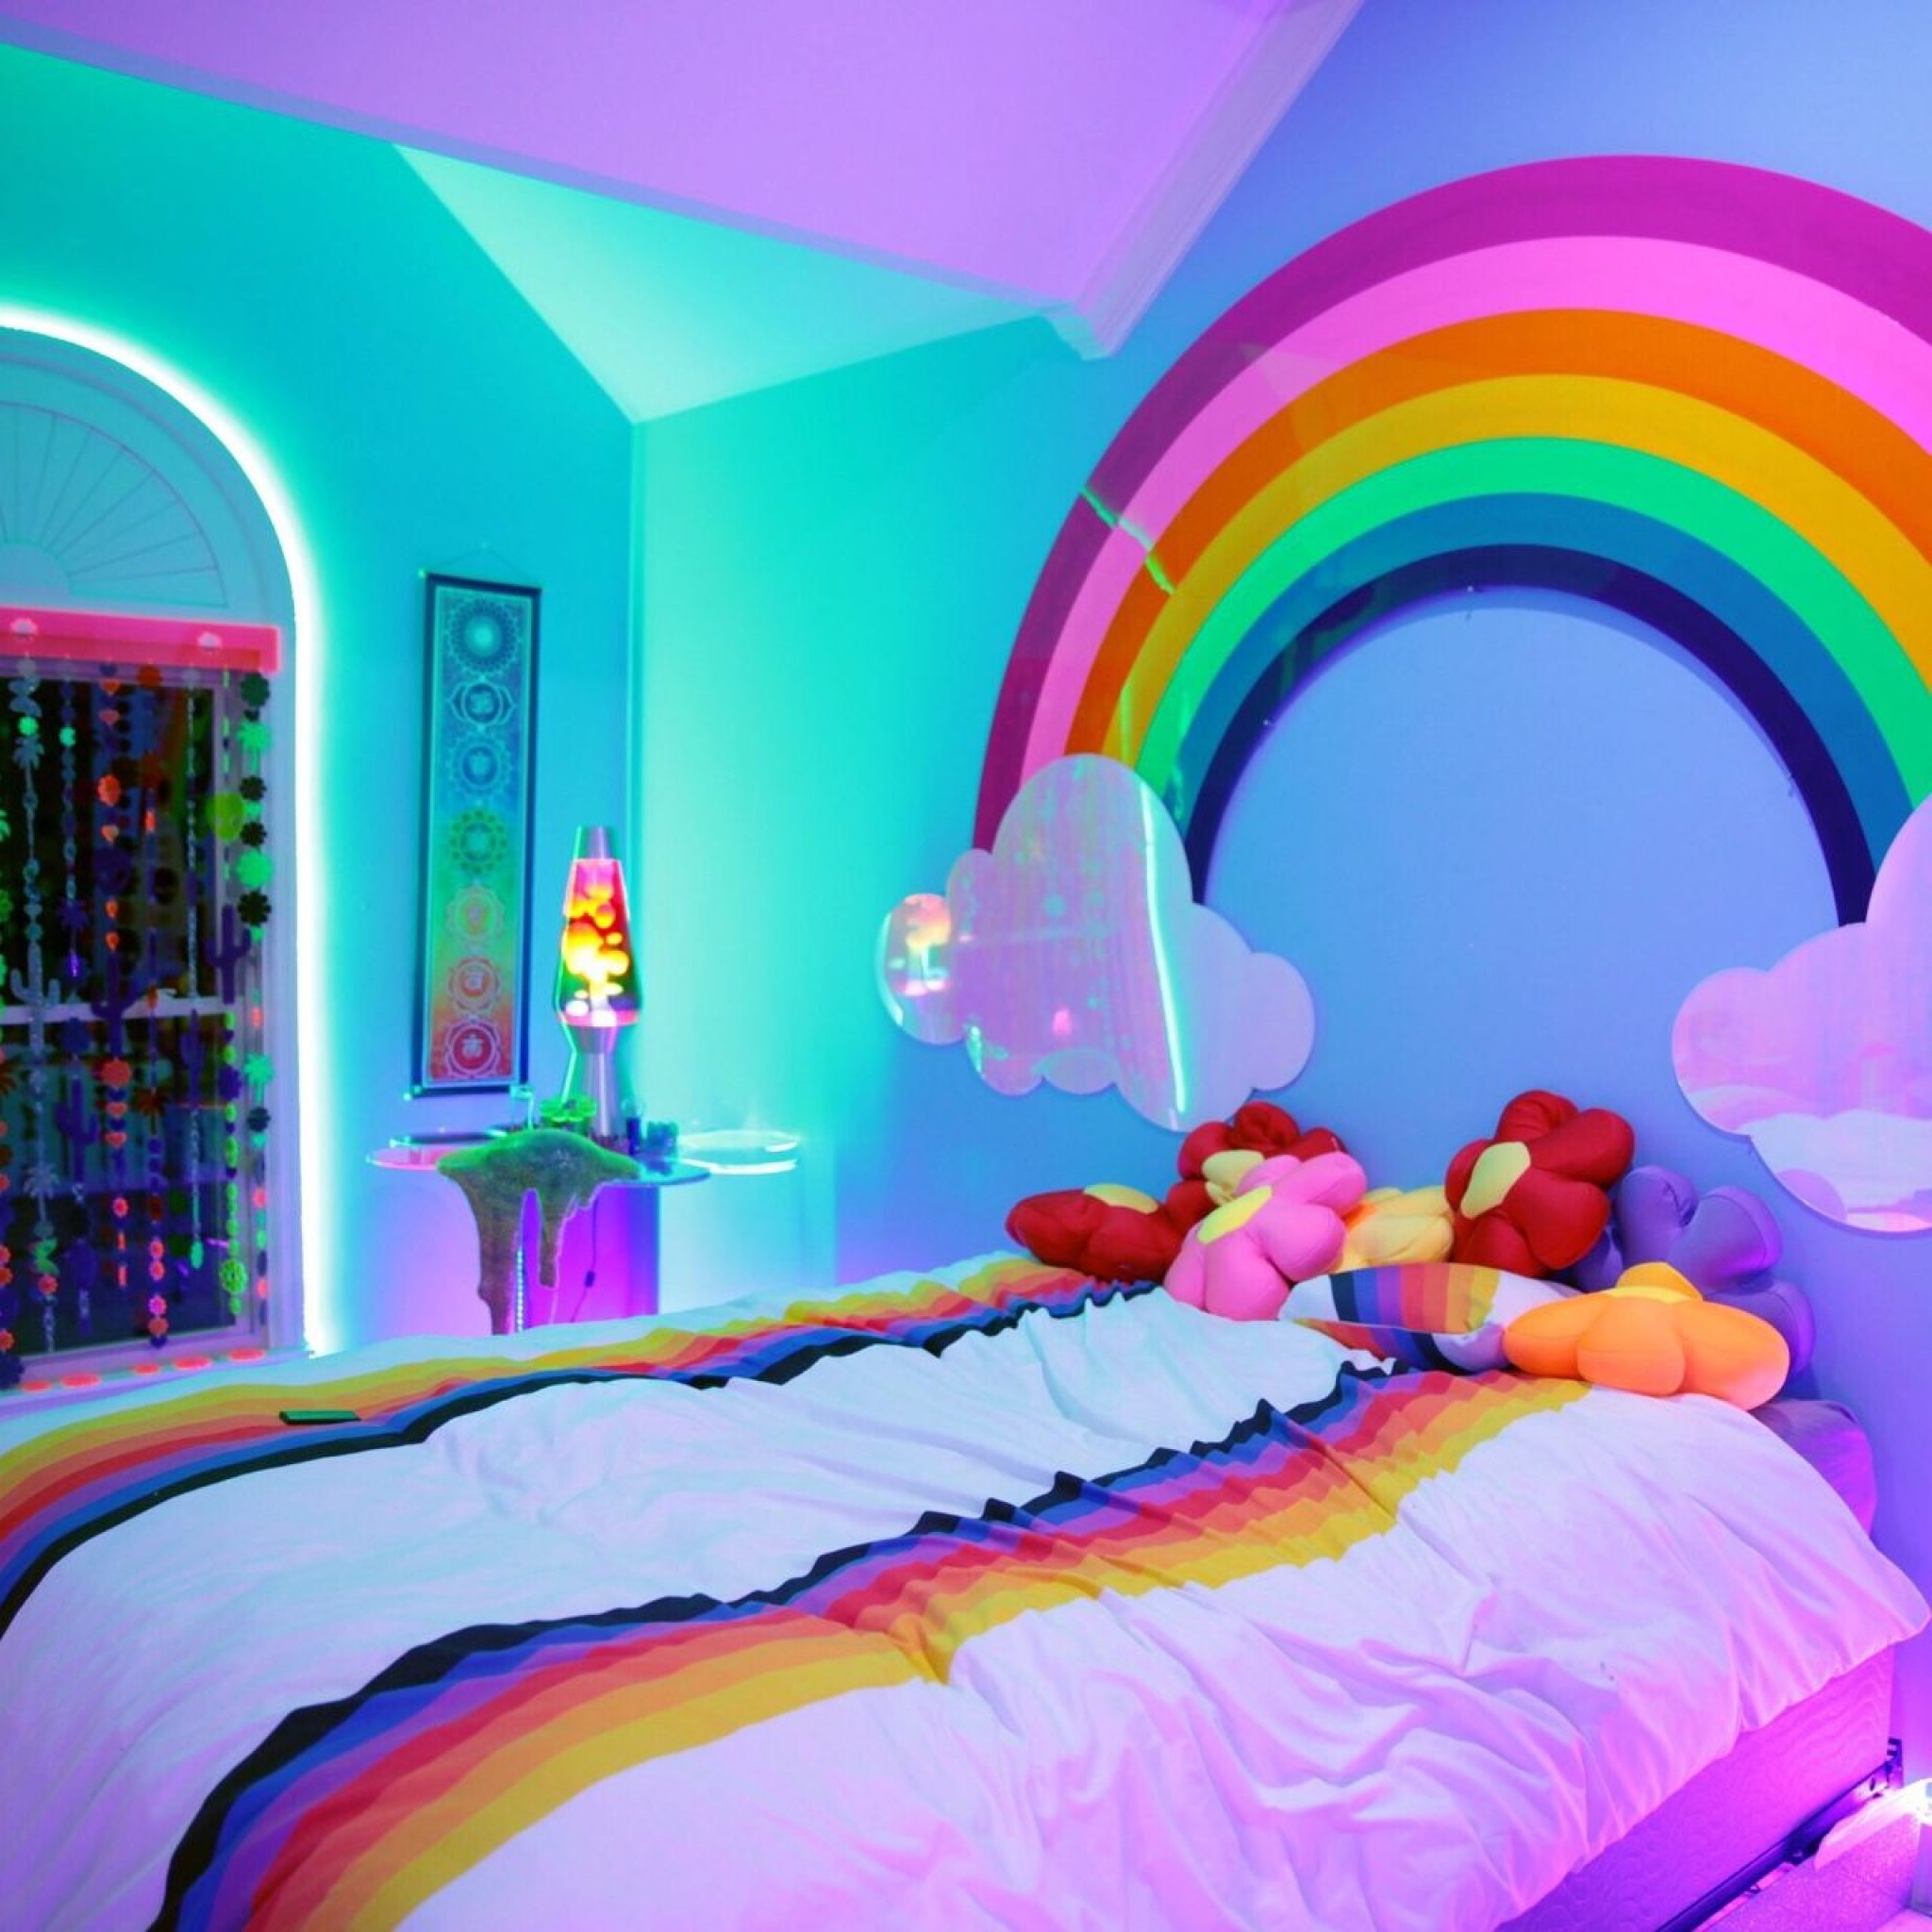 Thinking Of A Rainbow Color Themed Home? Learn 23+ Amazing Decor Ideas